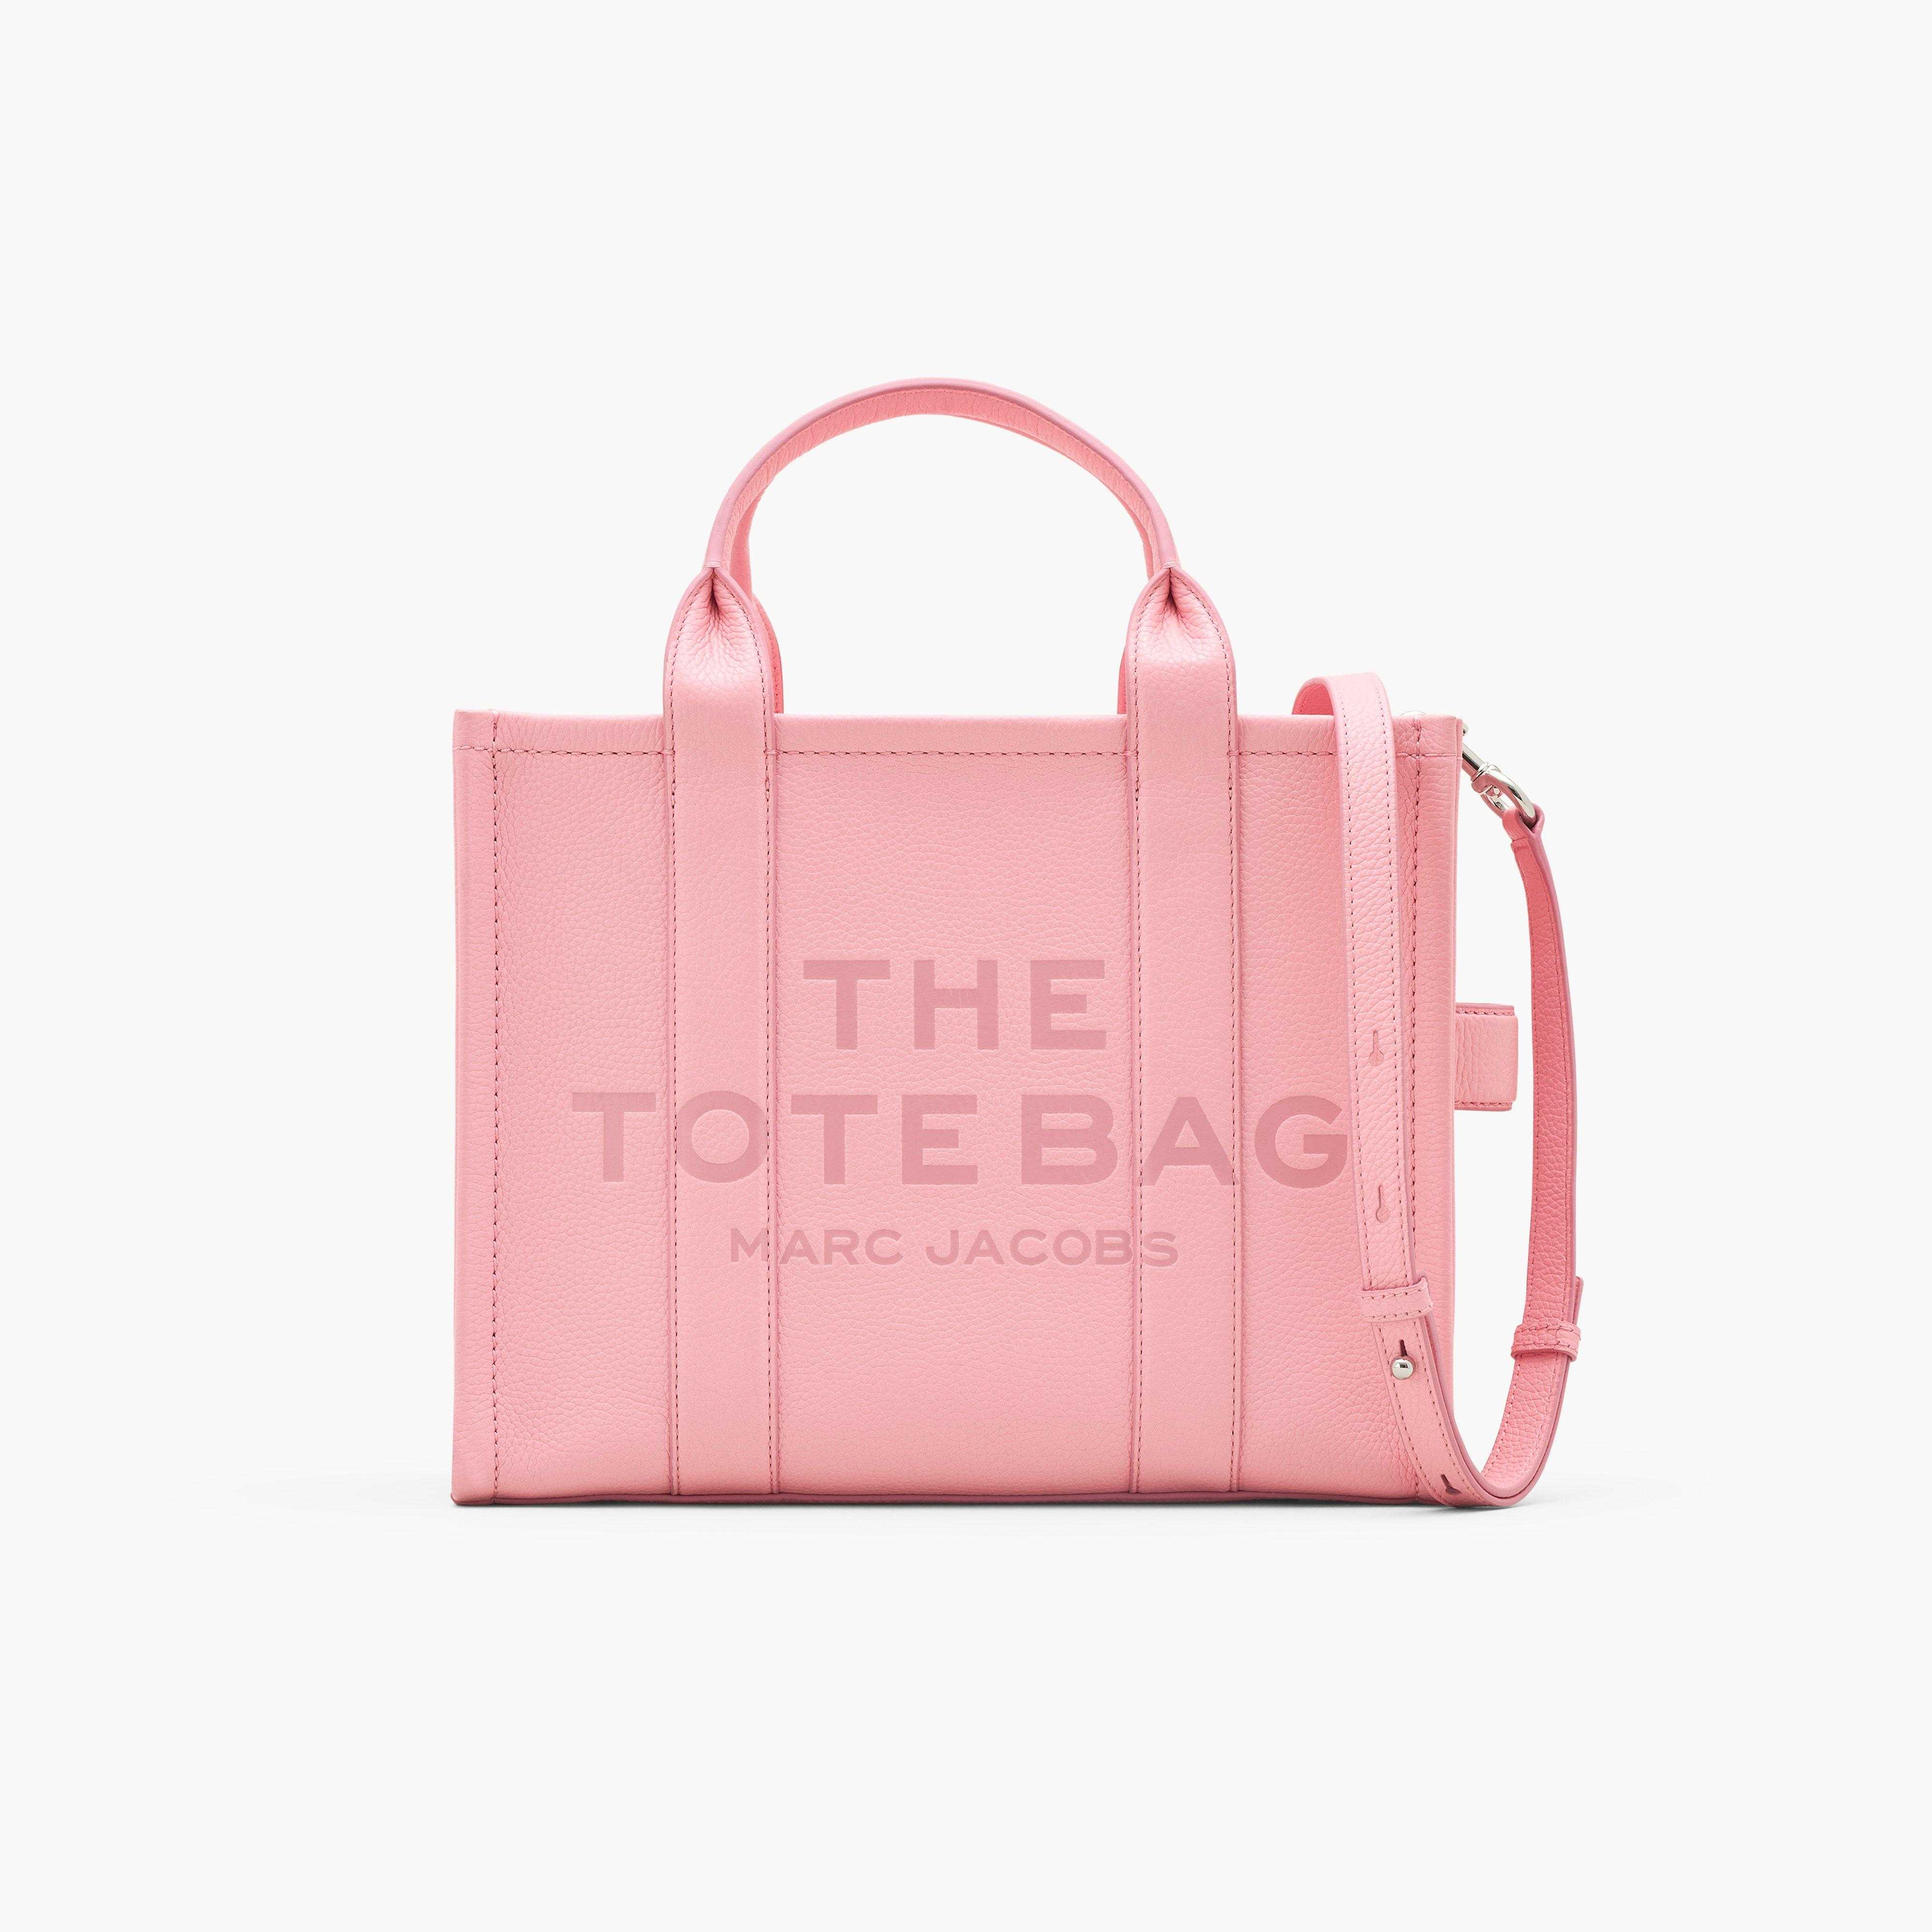 MARC JACOBS The Leather Medium Tote Bag in Ribbon Pink